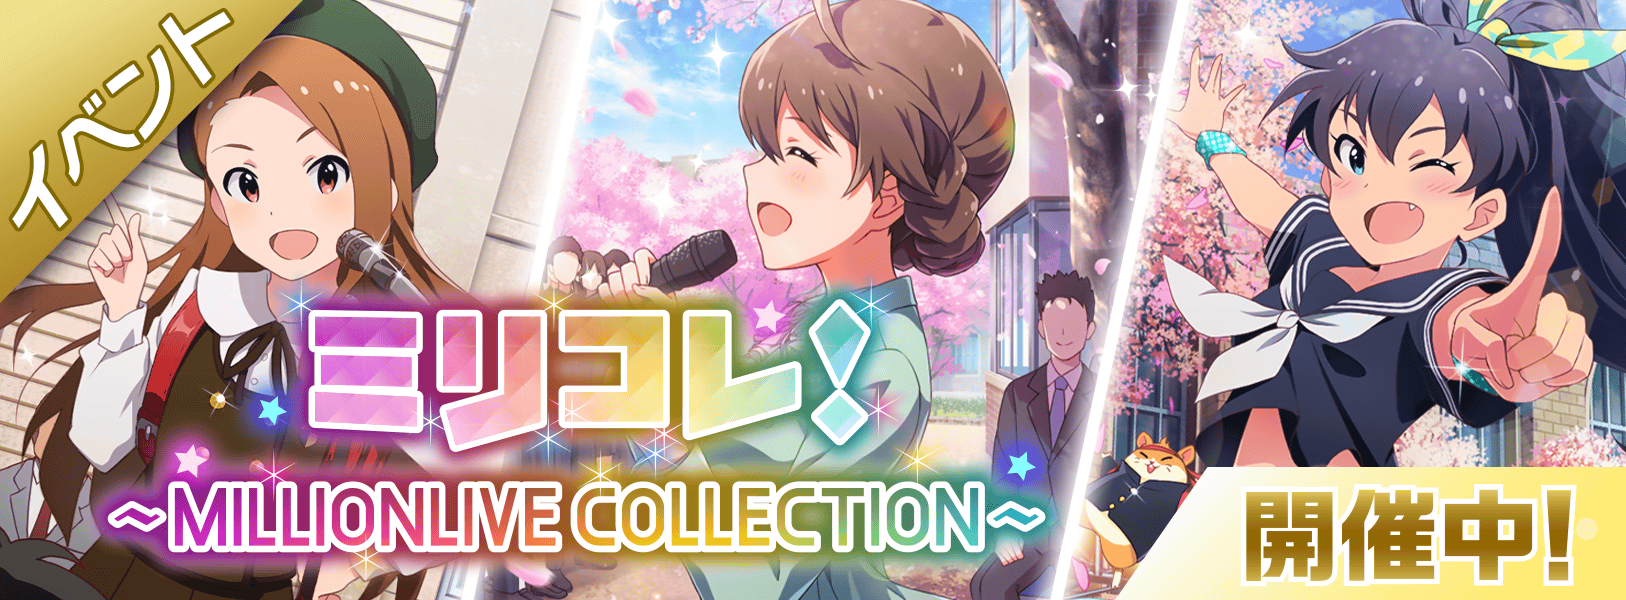 Millionlive Collection November 18 The Idolm Ster Million Live Wiki Fandom